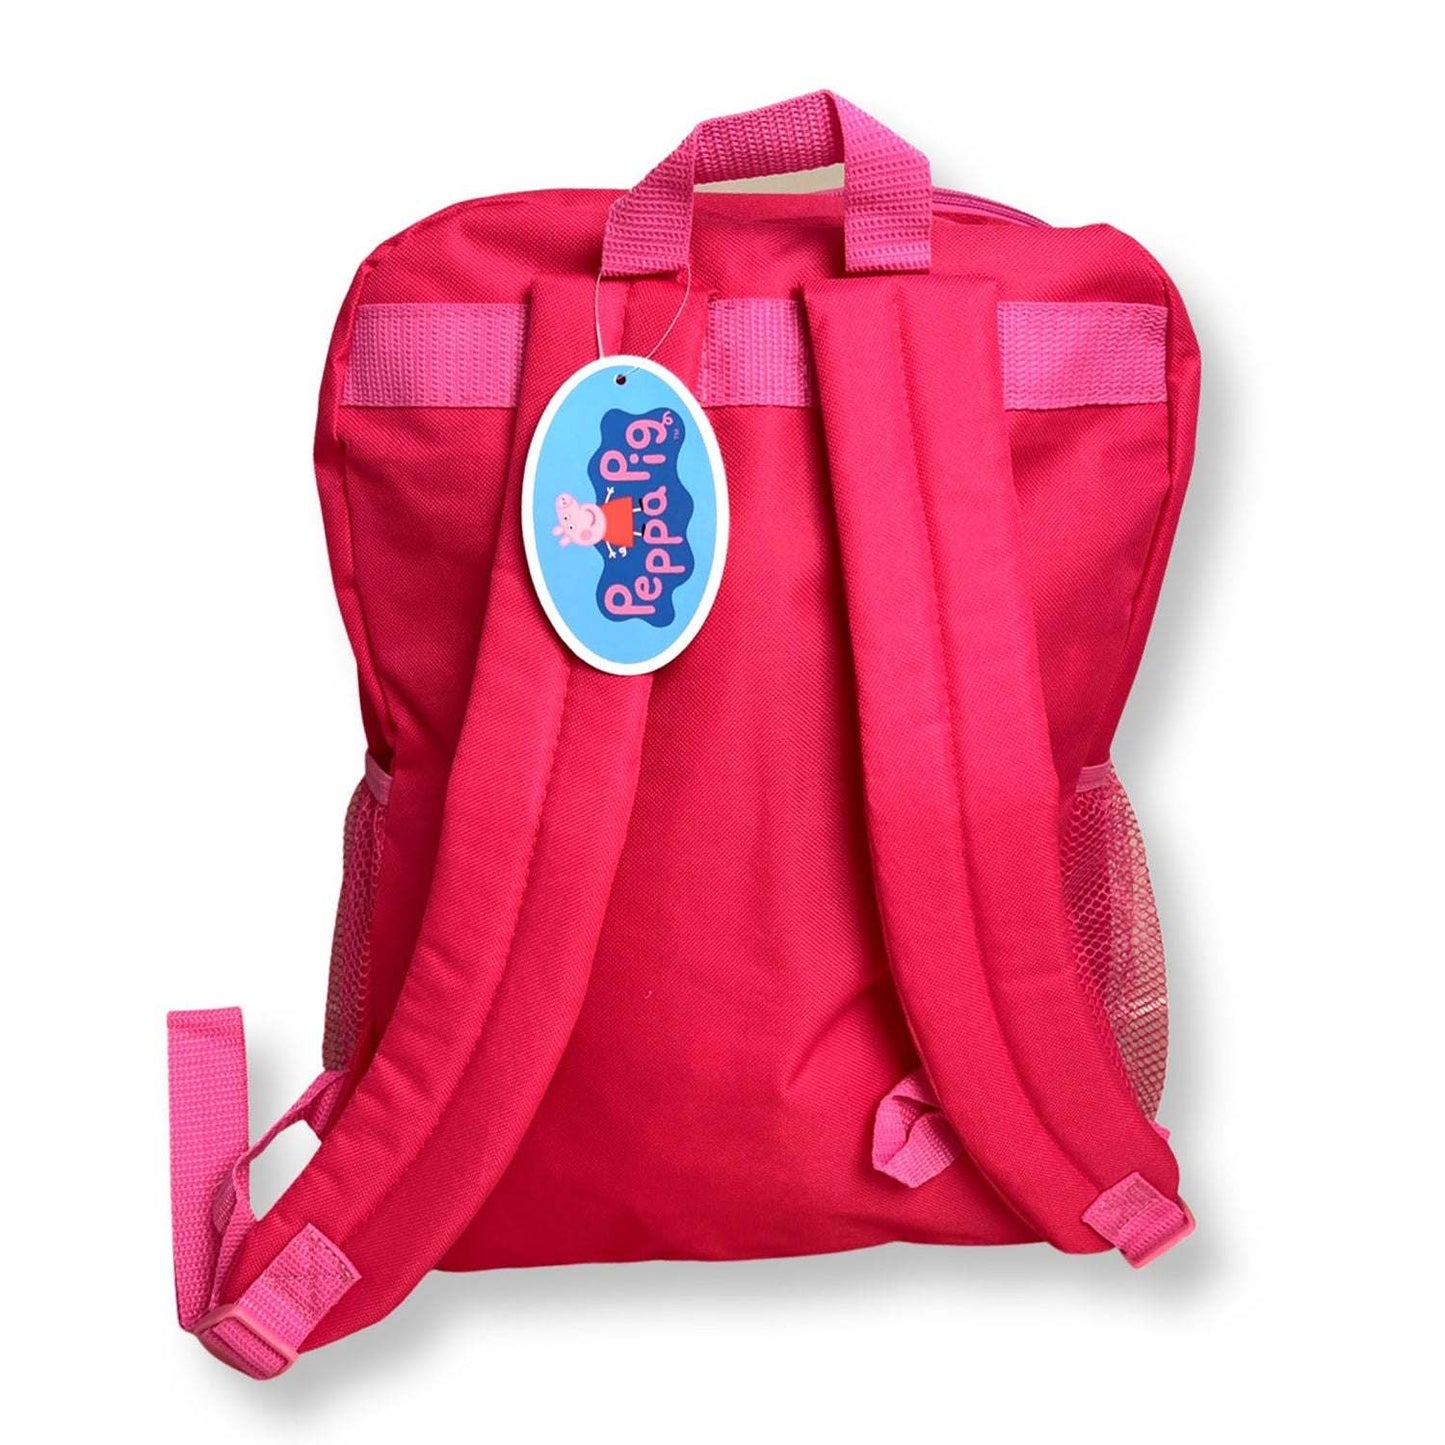 Peppa Pig Funtastic 16 Inch Backpack and Lunch Bag Set